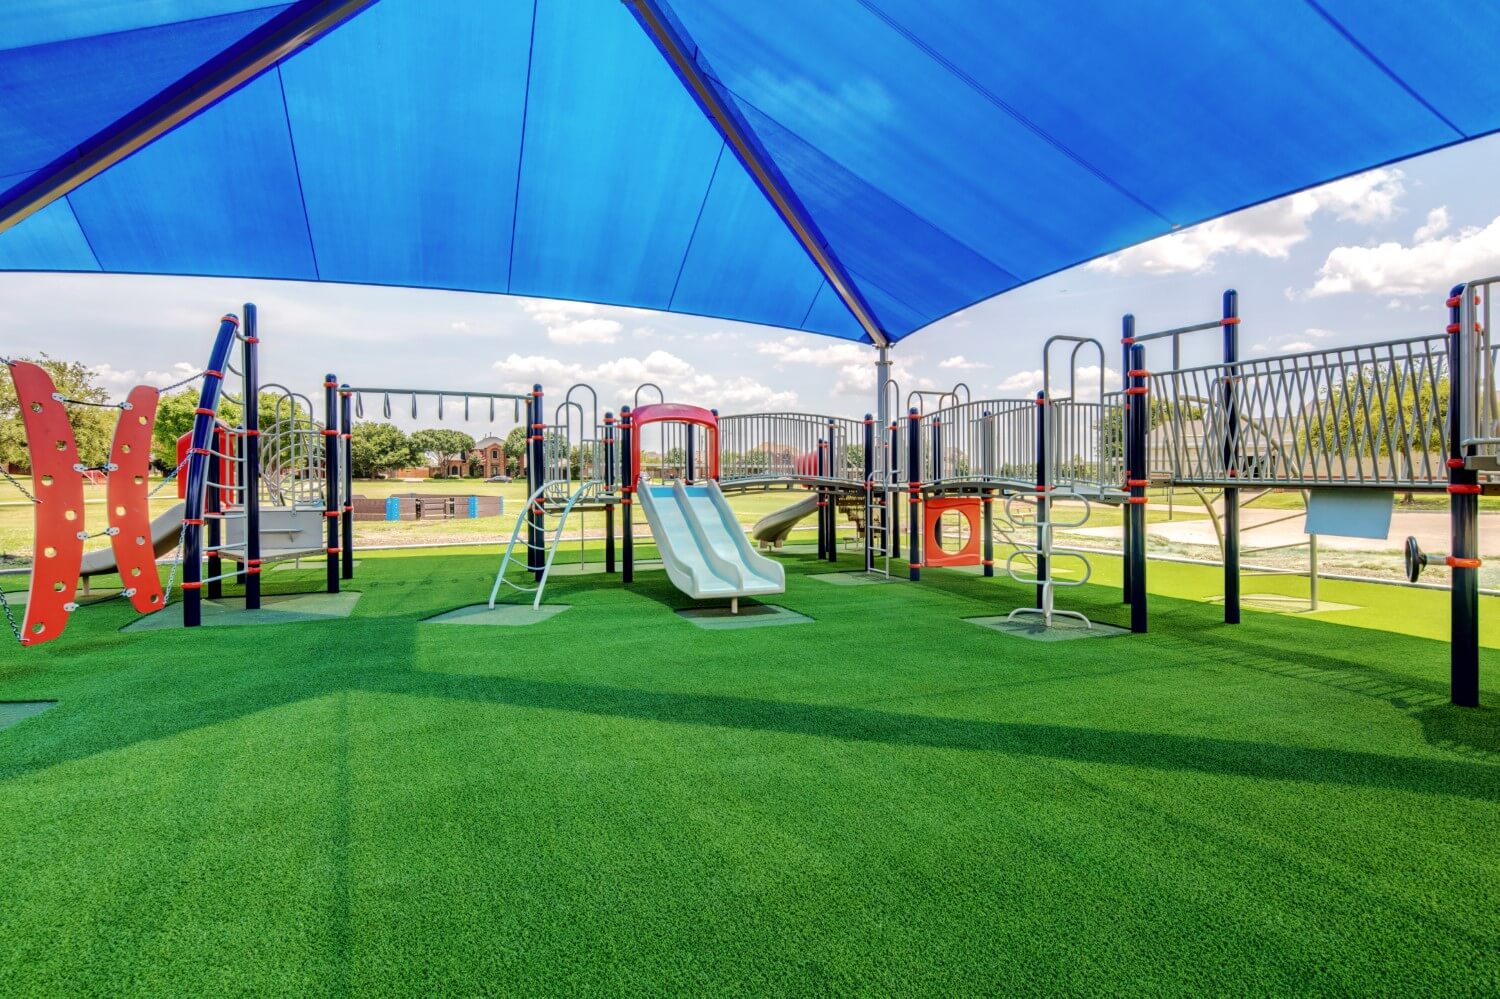 jungle gym installed on artificial grass